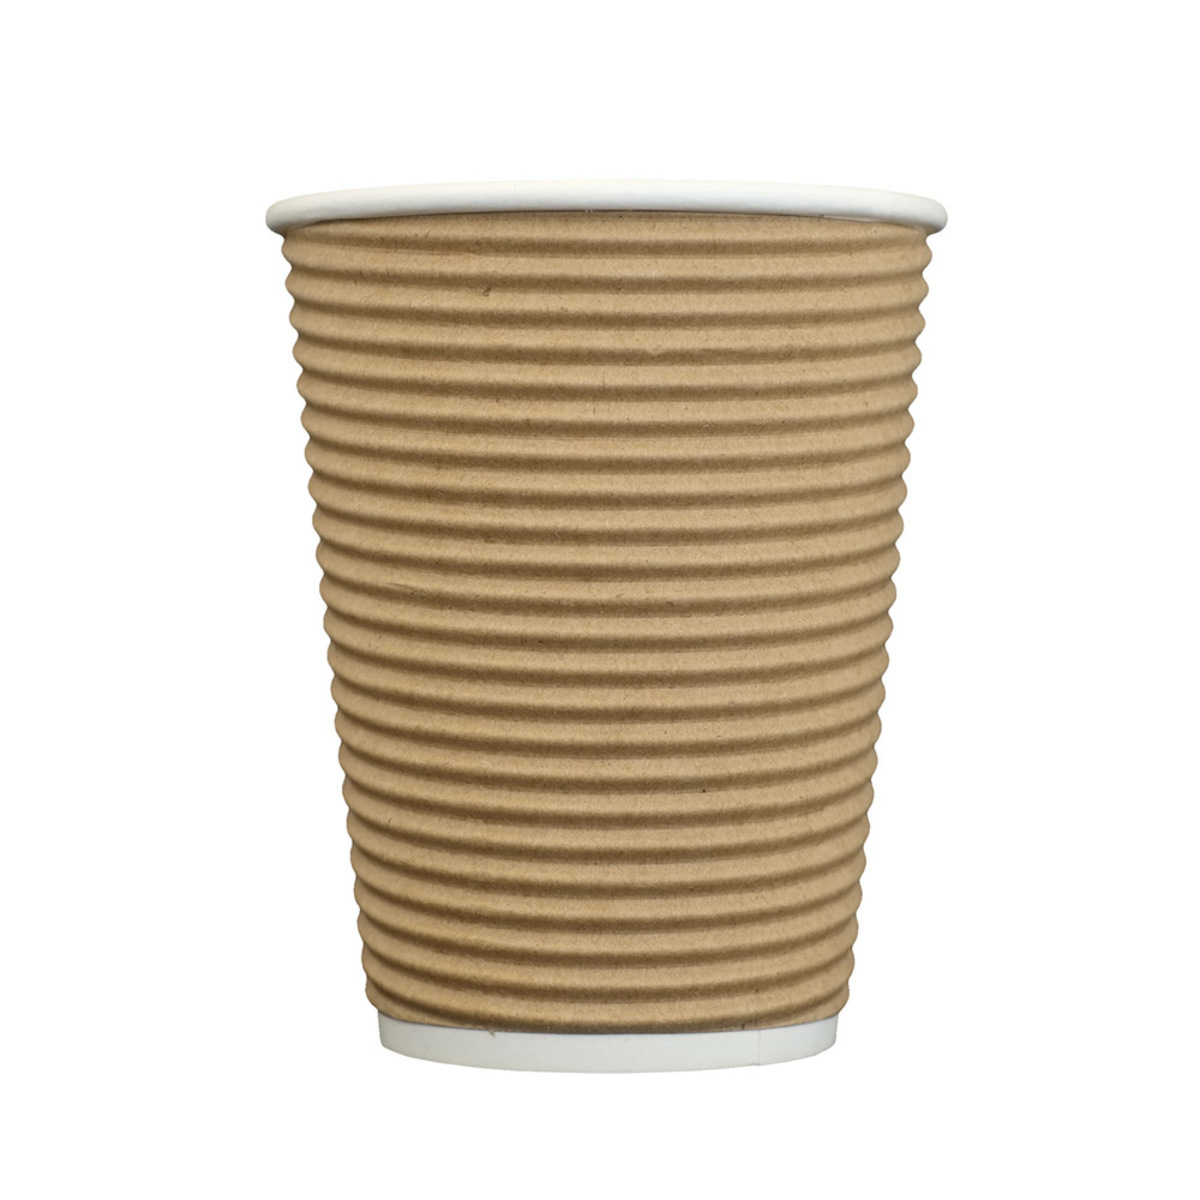 Cafe Express 8oz / 227ml Brown Corrugated Hot Cups, 1000 Pack